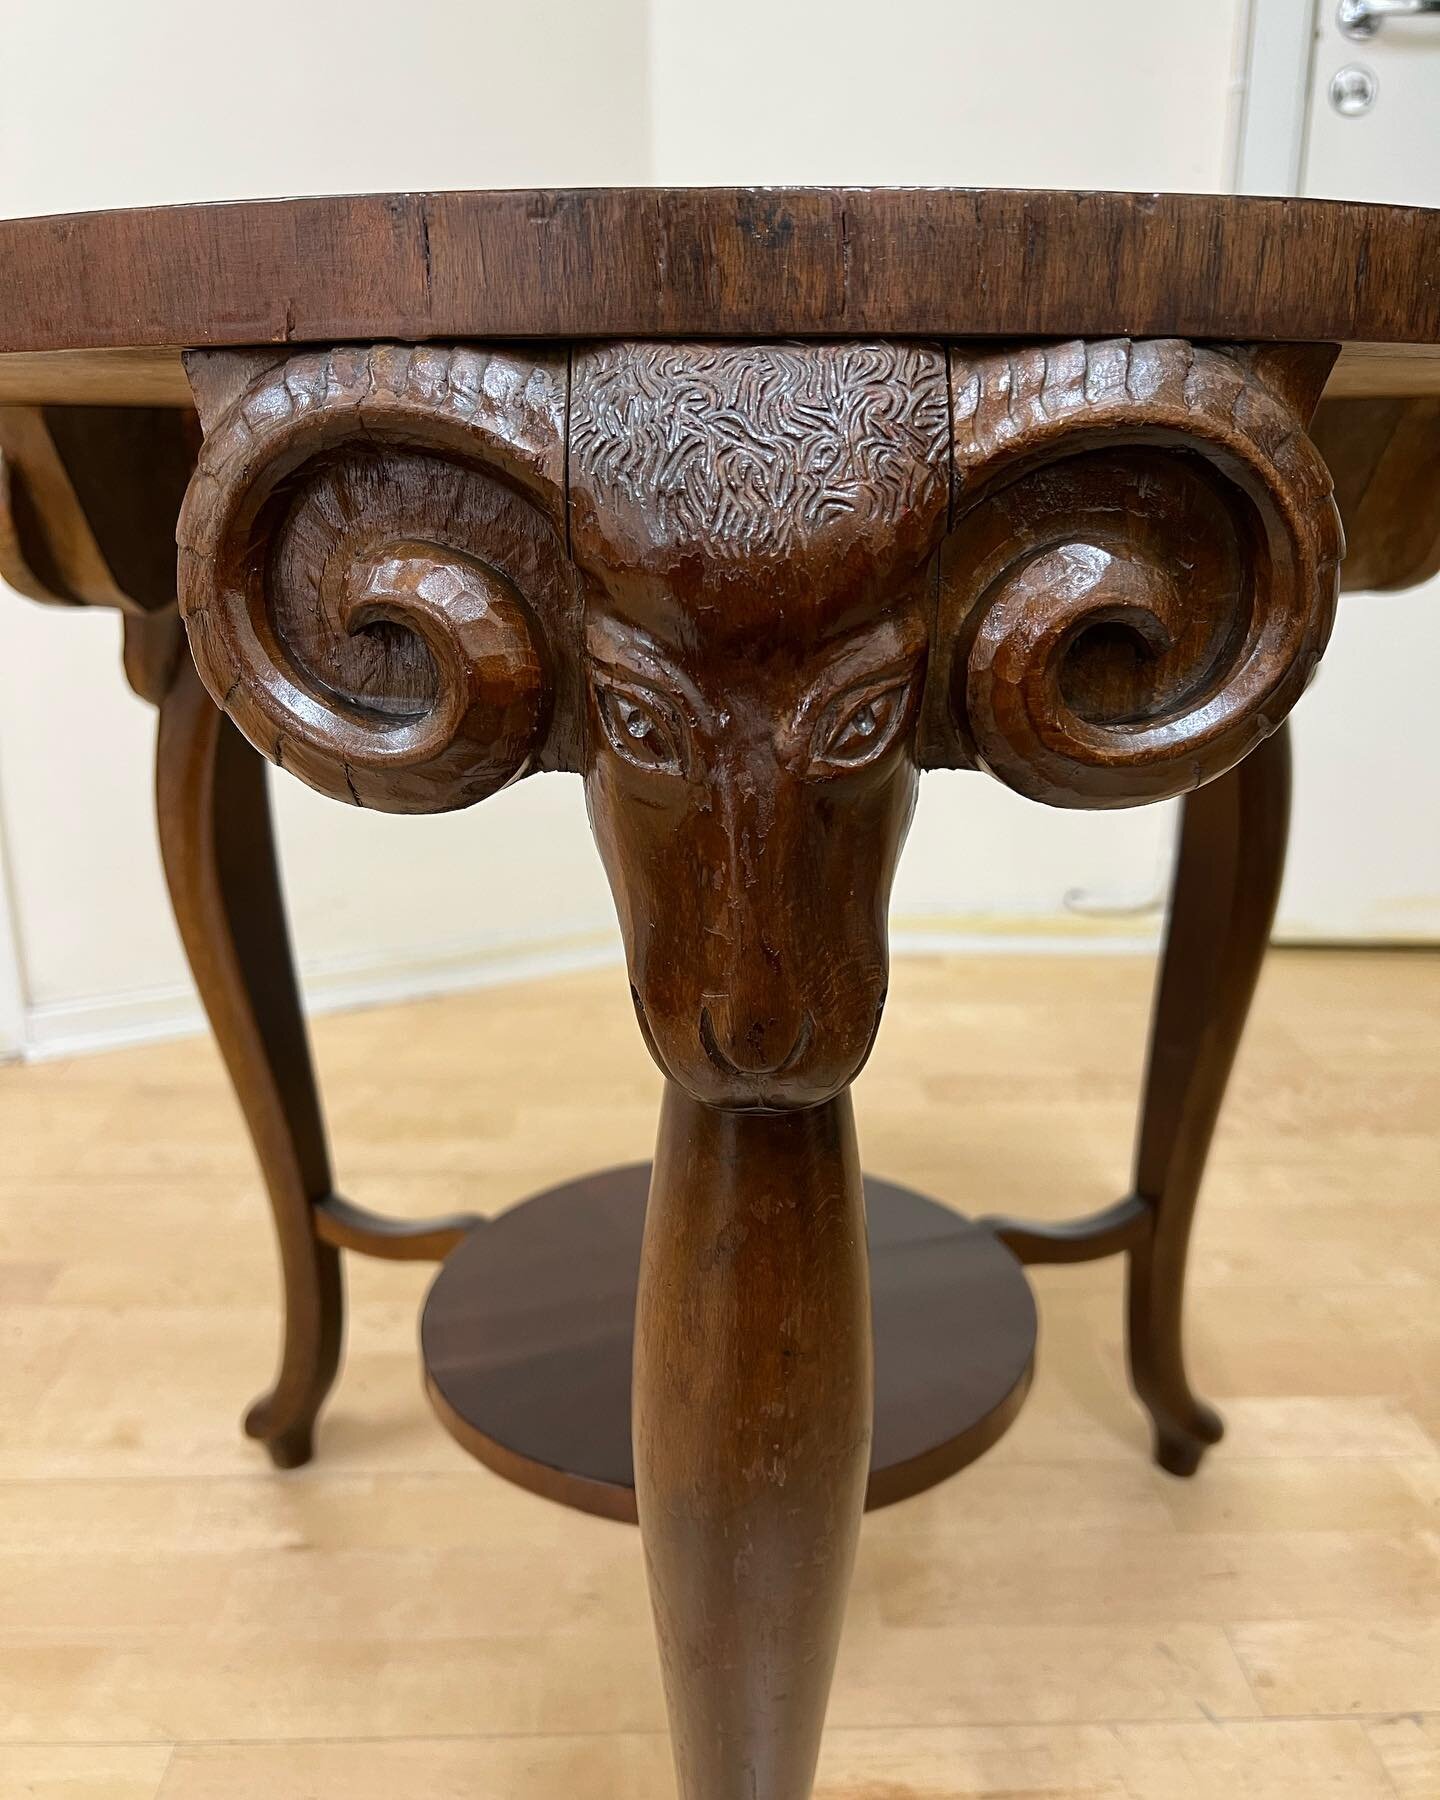 Sometimes you get to work with a truly unique piece! This family heirloom had been spiralling downwards for many years but after an extensive treatment it&rsquo;s ready to be enjoyed by many more generations. Swipe to see some before and after pictur